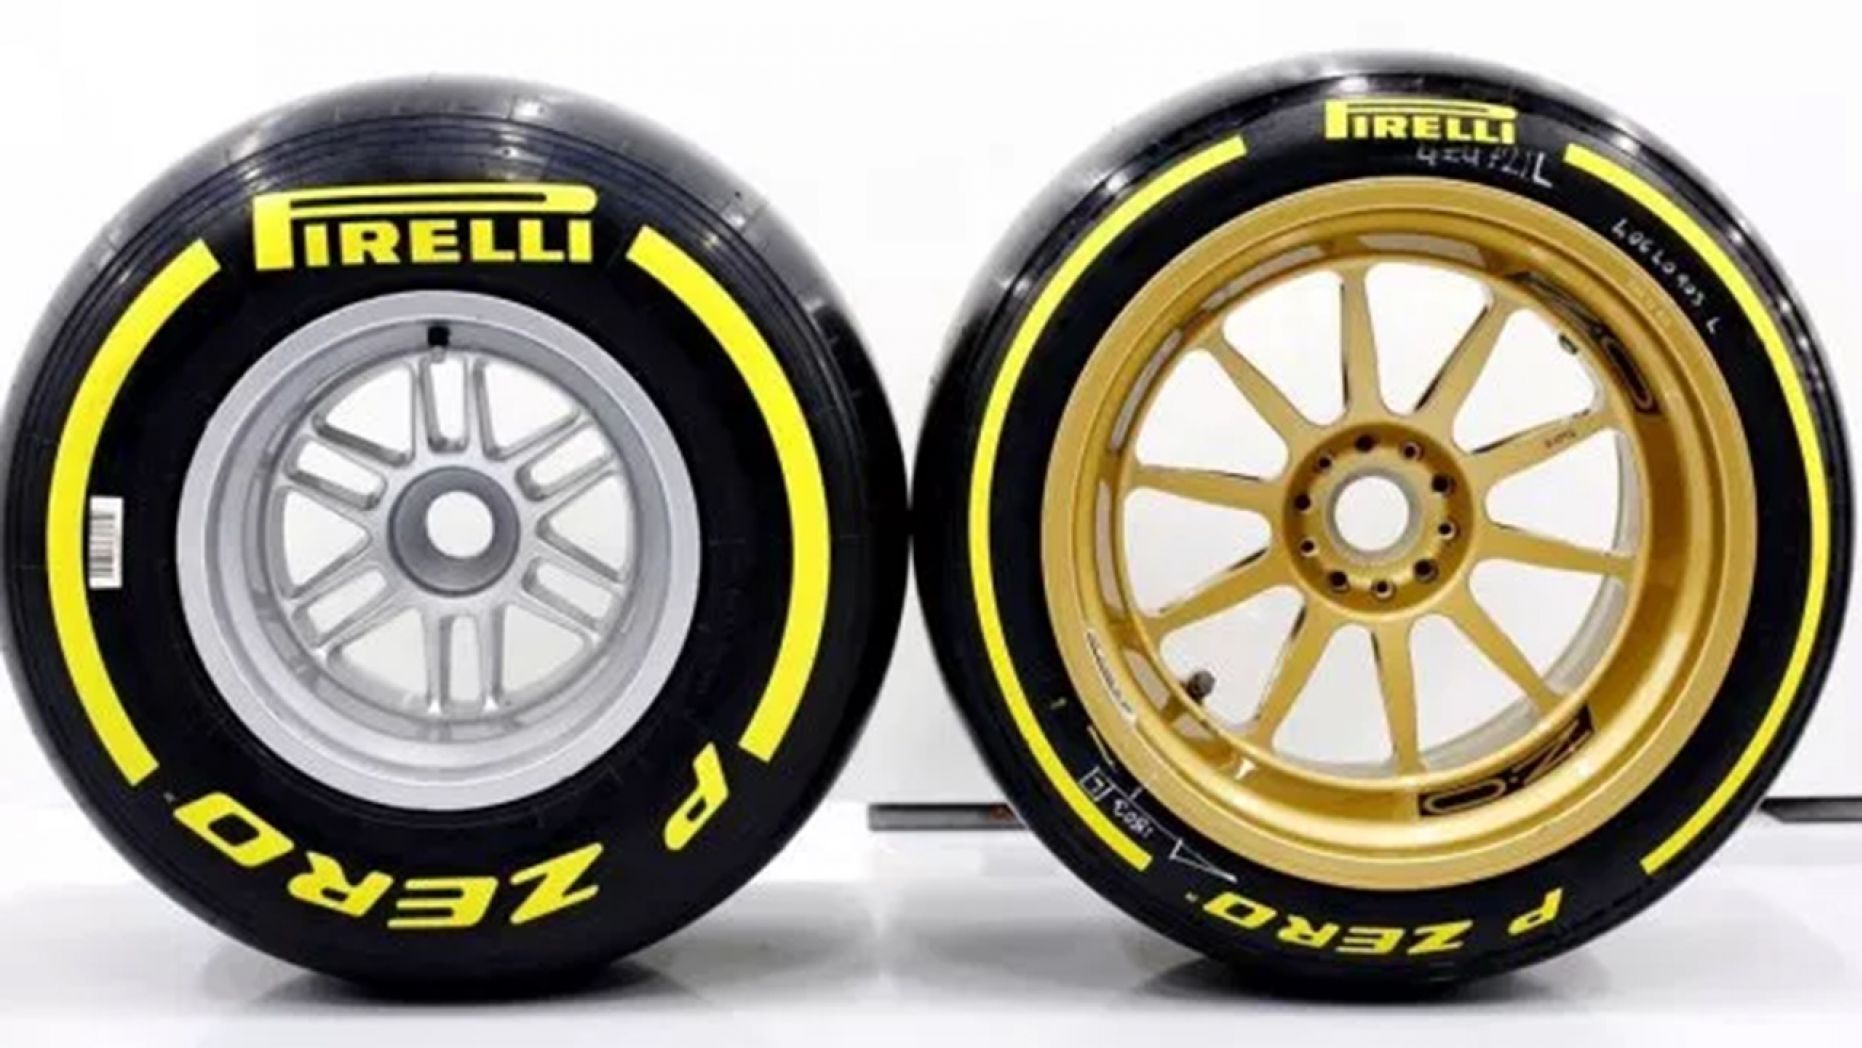 F1 is switching to 18-inch wheels too